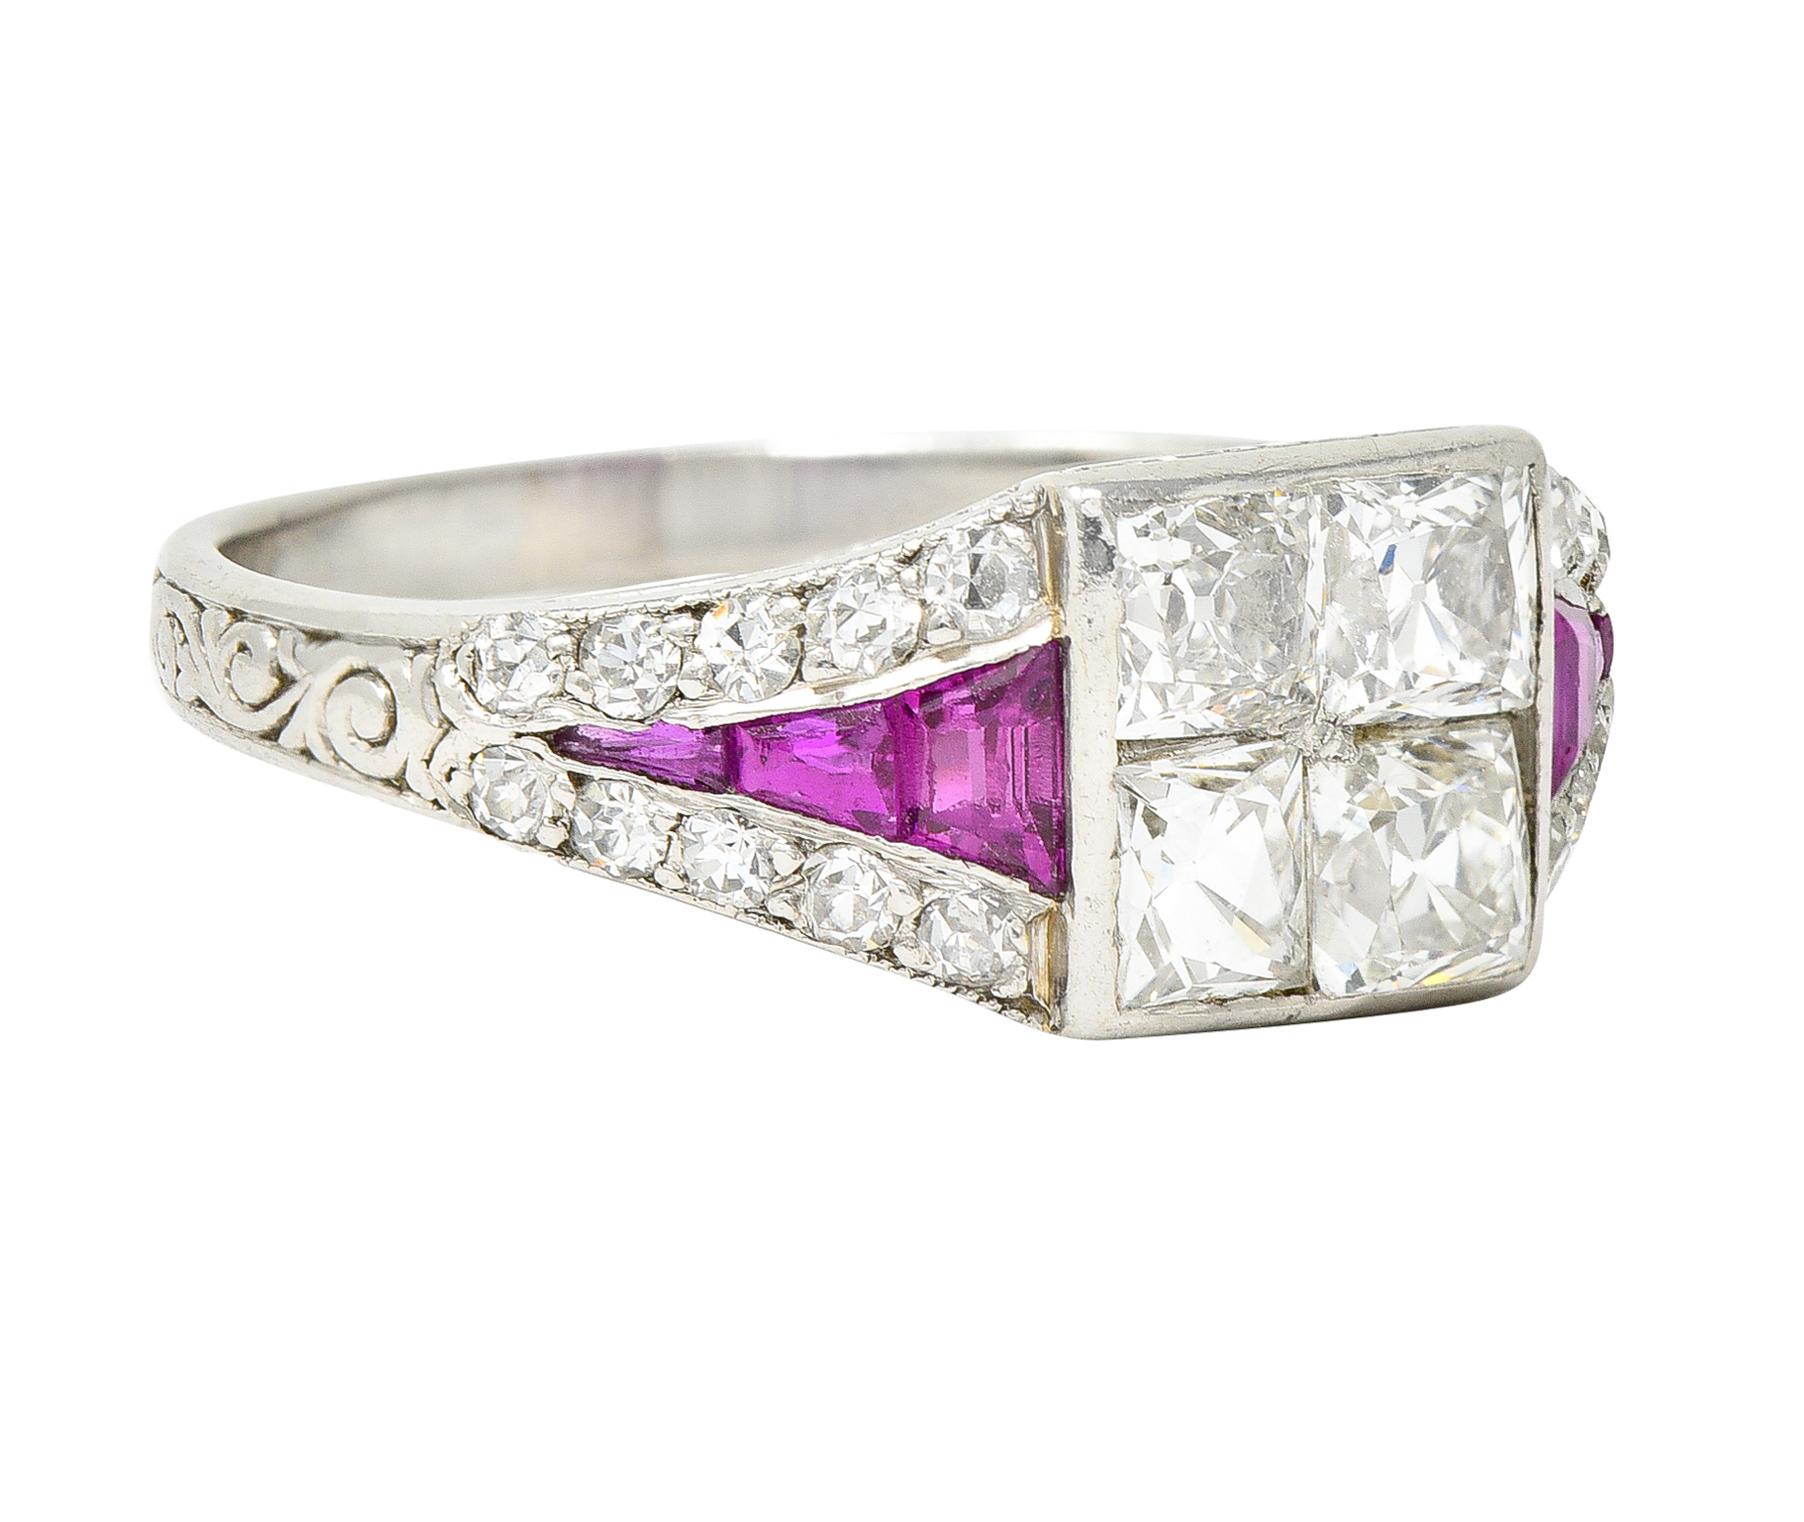 Band ring features a square form center mystery set with four French cut diamonds. Weighing collectively approximately 1.12 carats with H/I color and VS2 clarity. Flanked by rubies calibré cut into a pointed motif. Weighing in total approximately